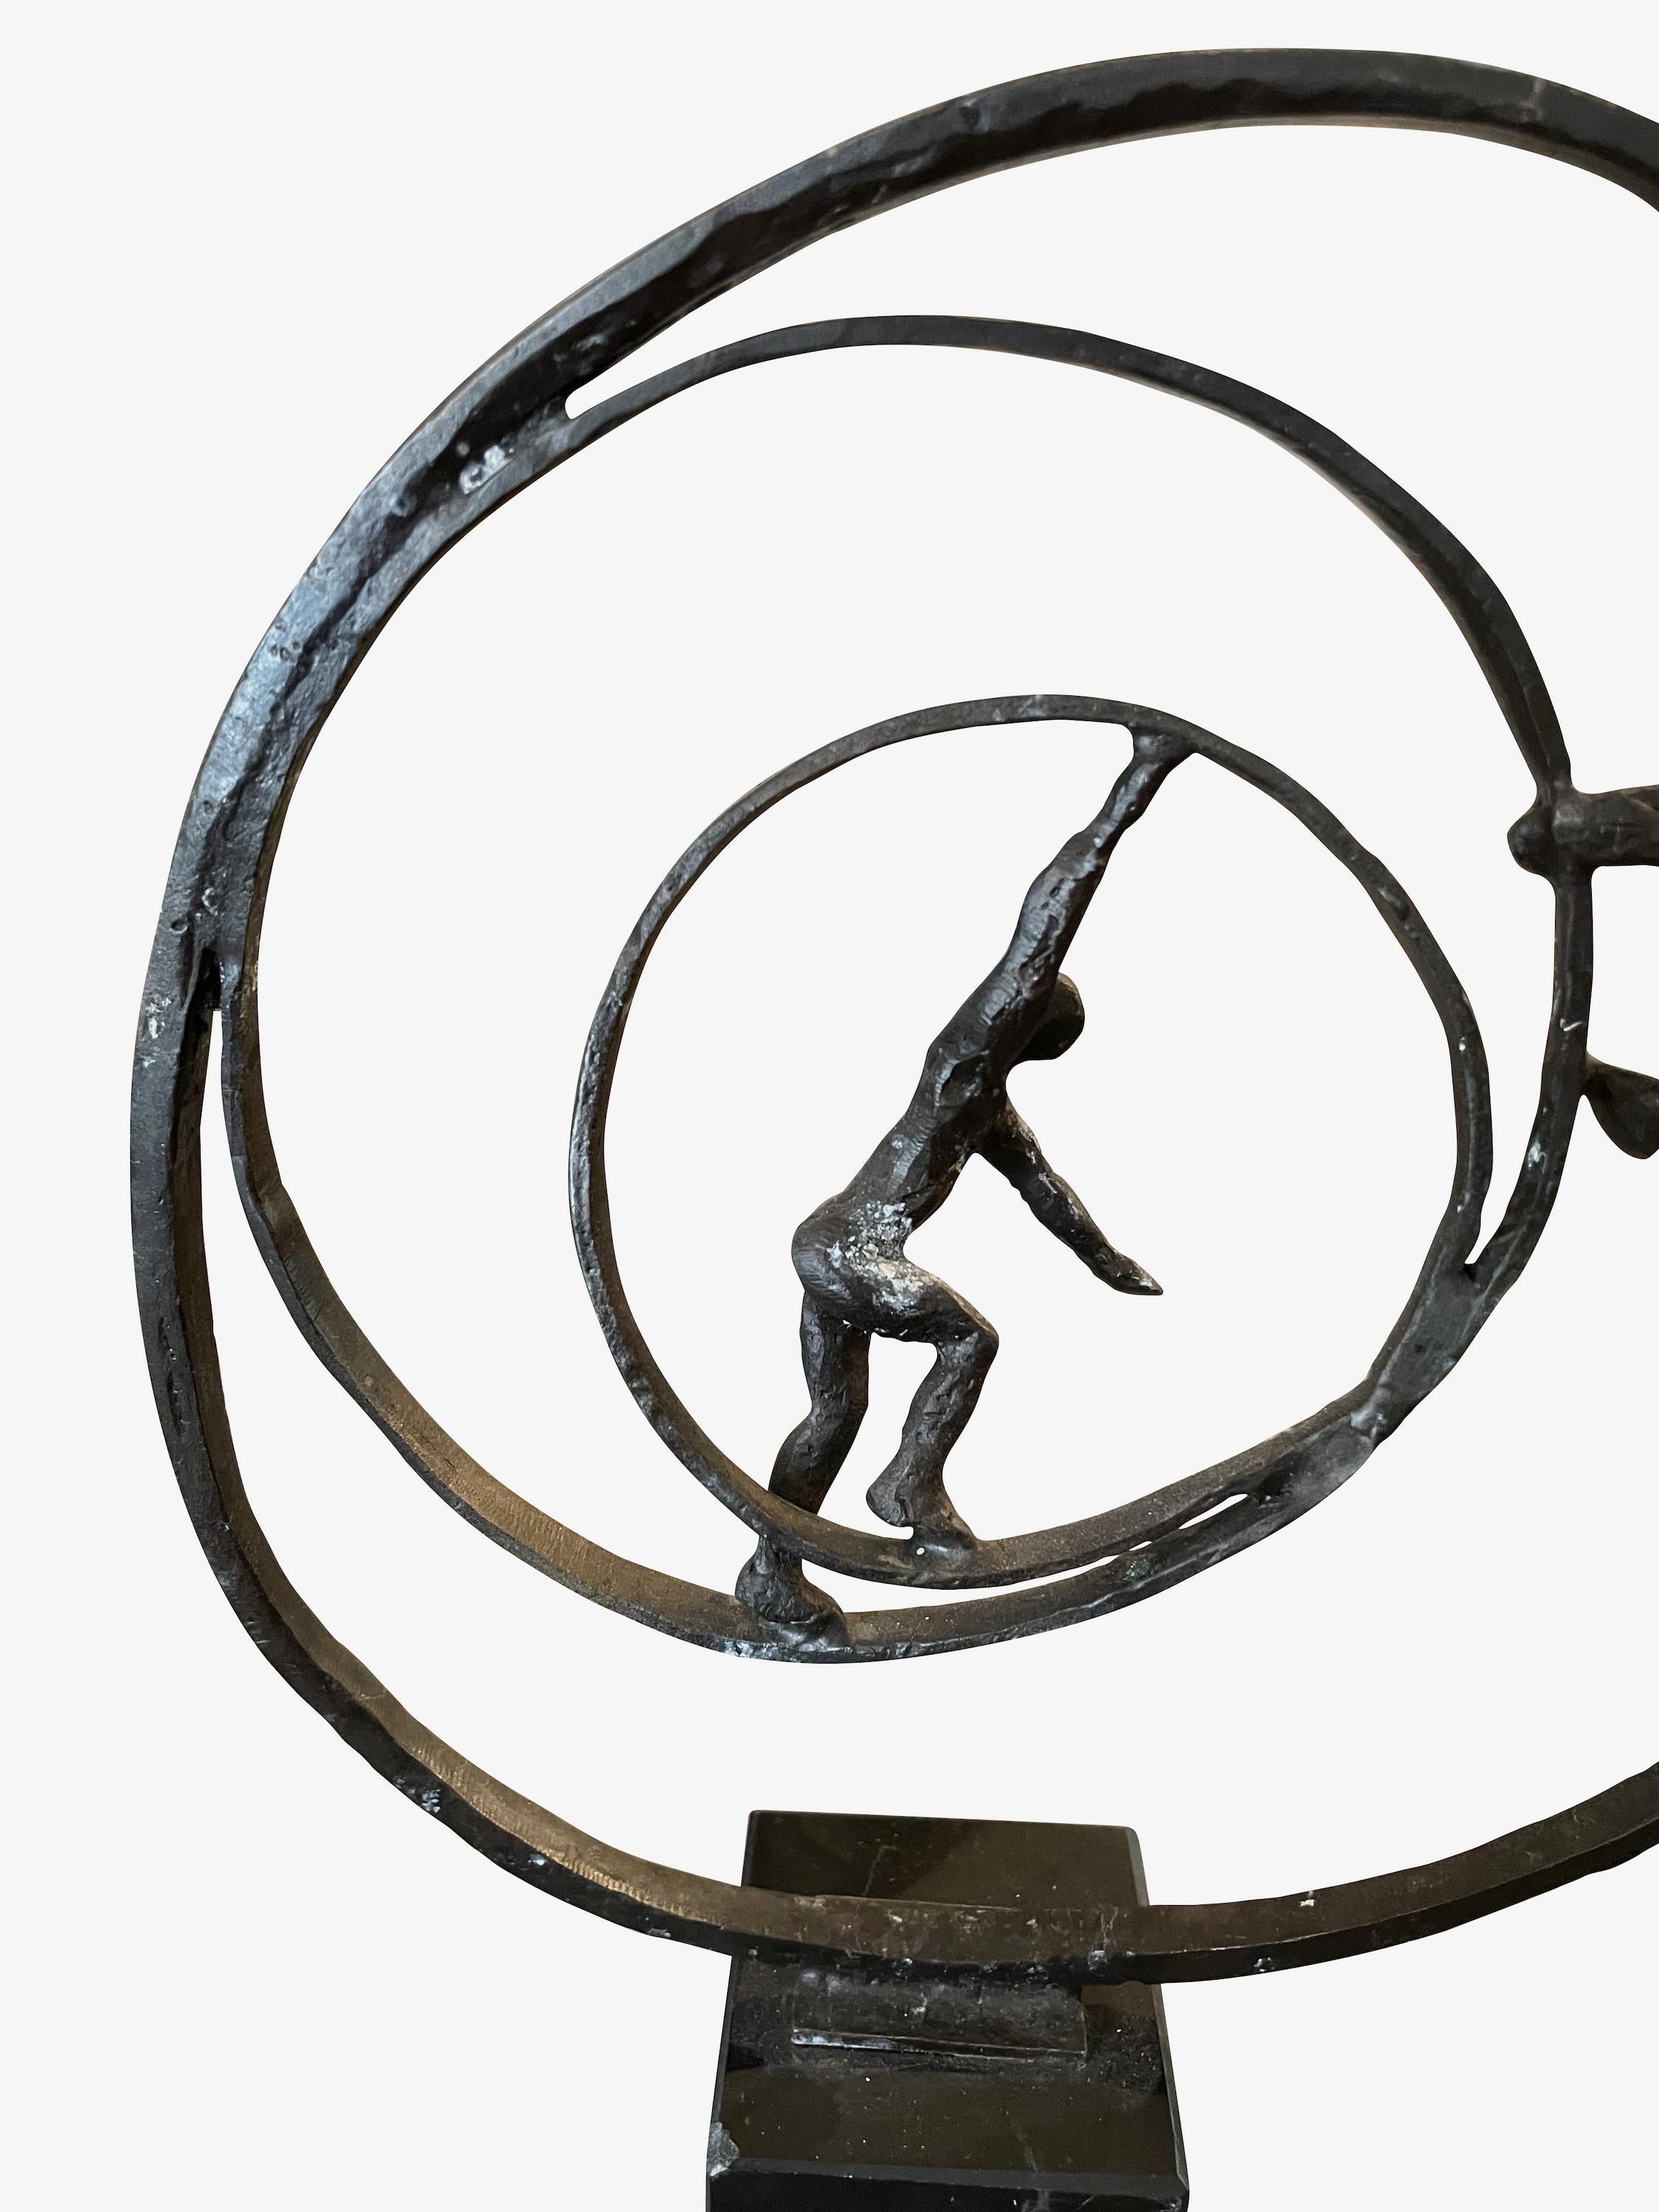 Contemporary Belgian hammered iron rings with two male figures.
Push and pull in motion.
Three concentric circles.
Mounted in marble cube measures 2.5